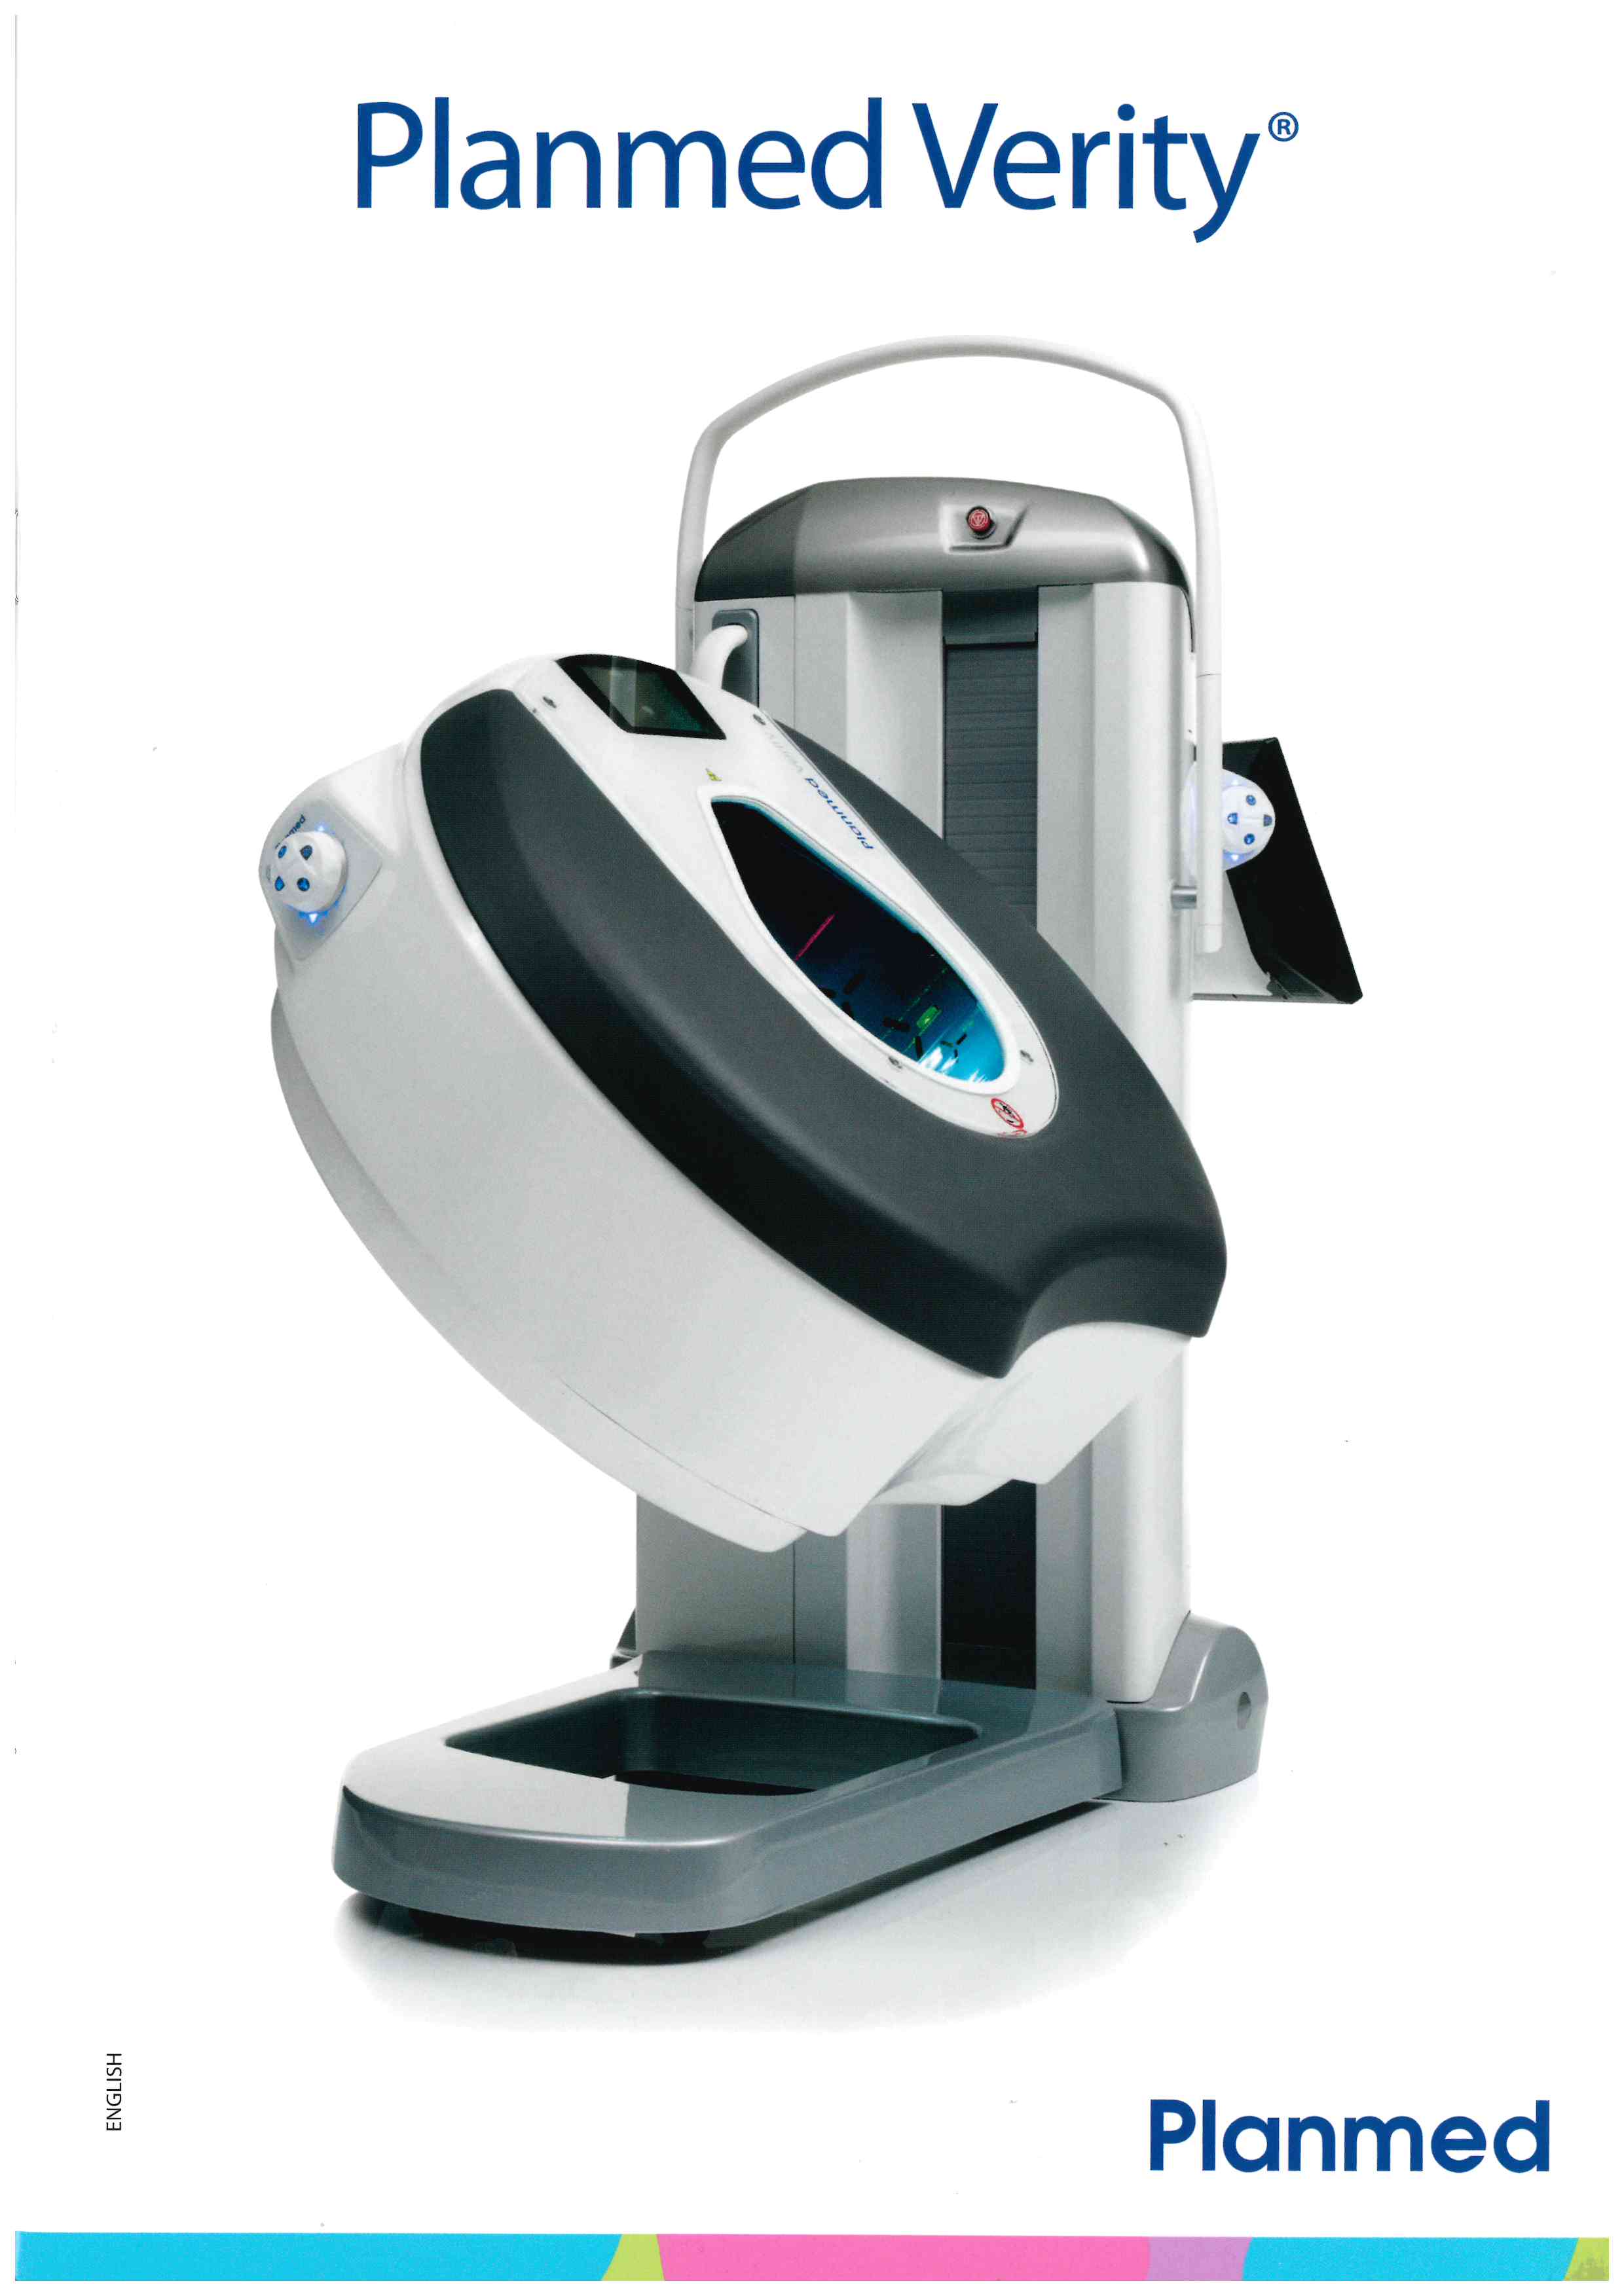 “Planmed” Computed Tomography X-ray System Verity®